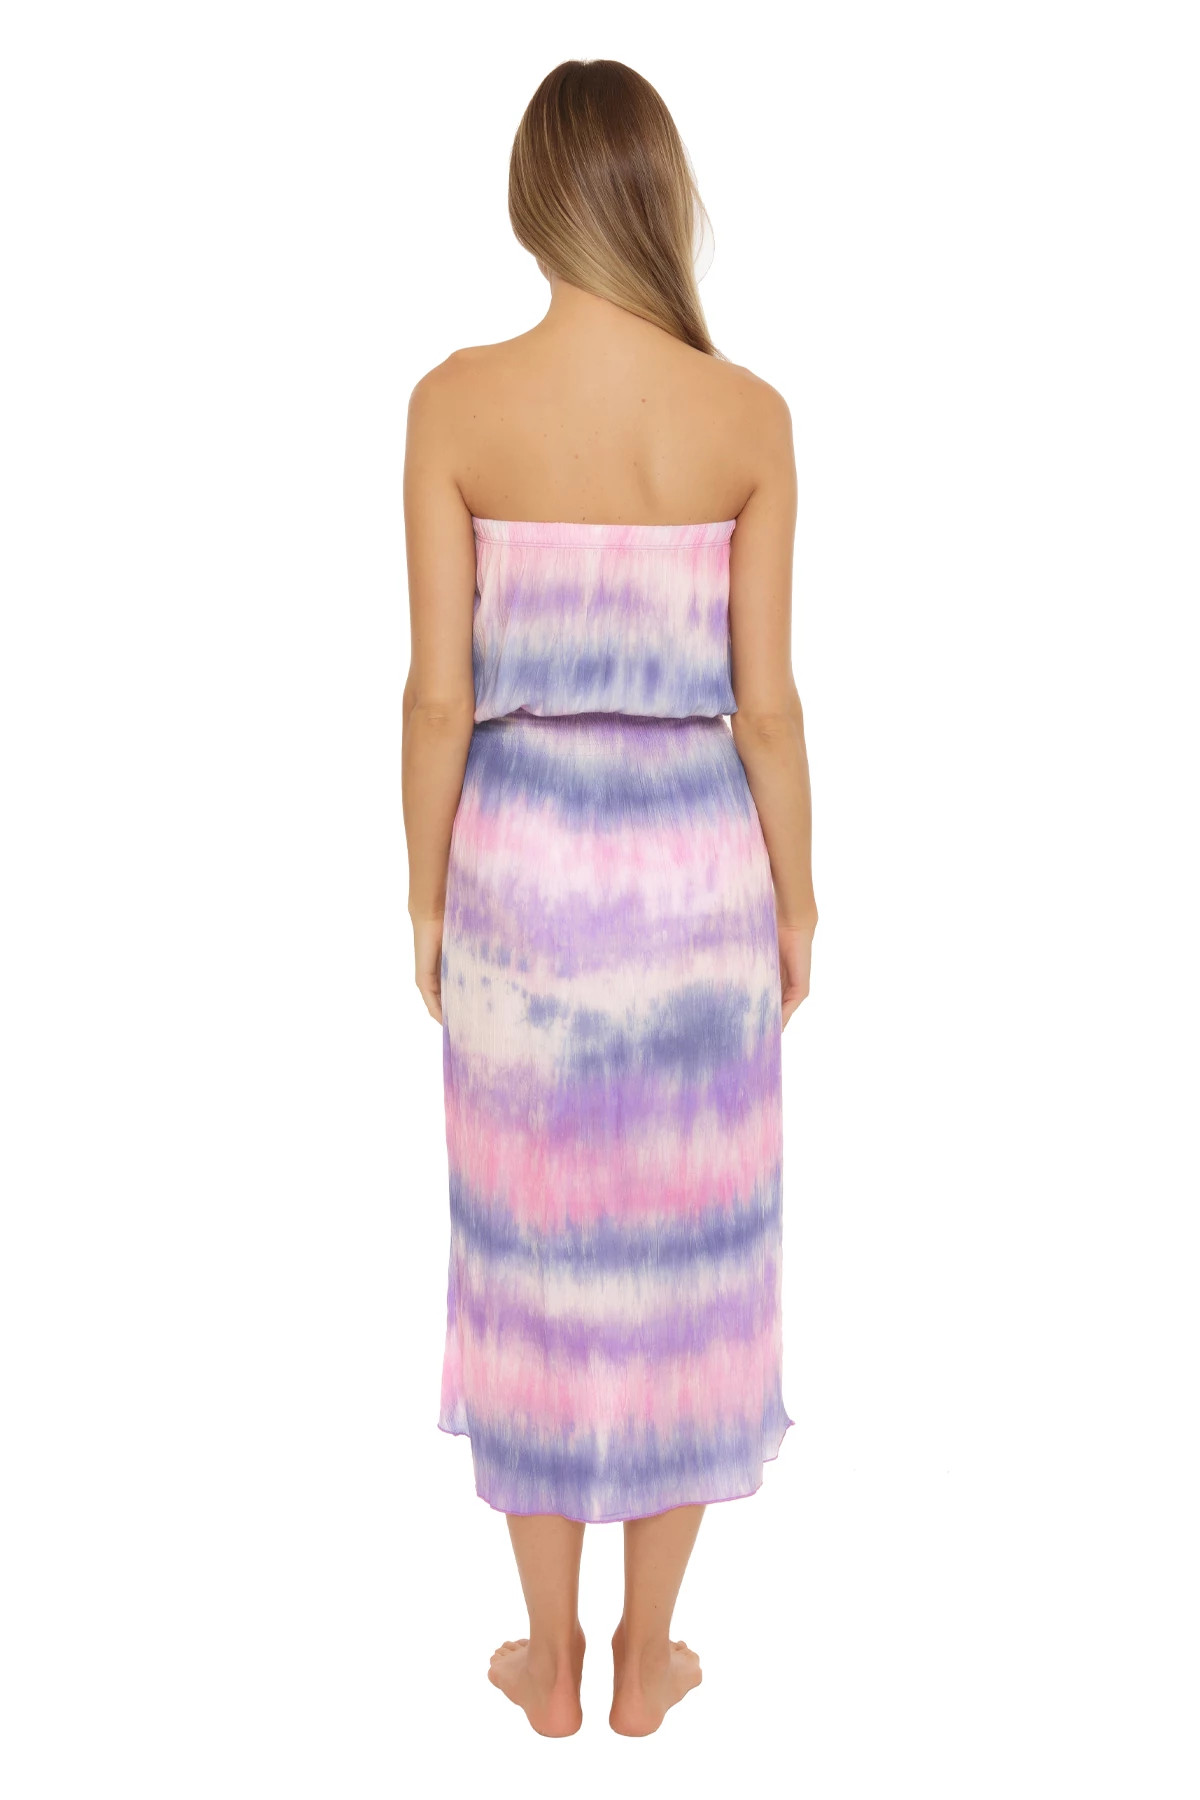 ORCHID/SAPPHIRE Tie-Dye Strapless Midi-Dress image number 2